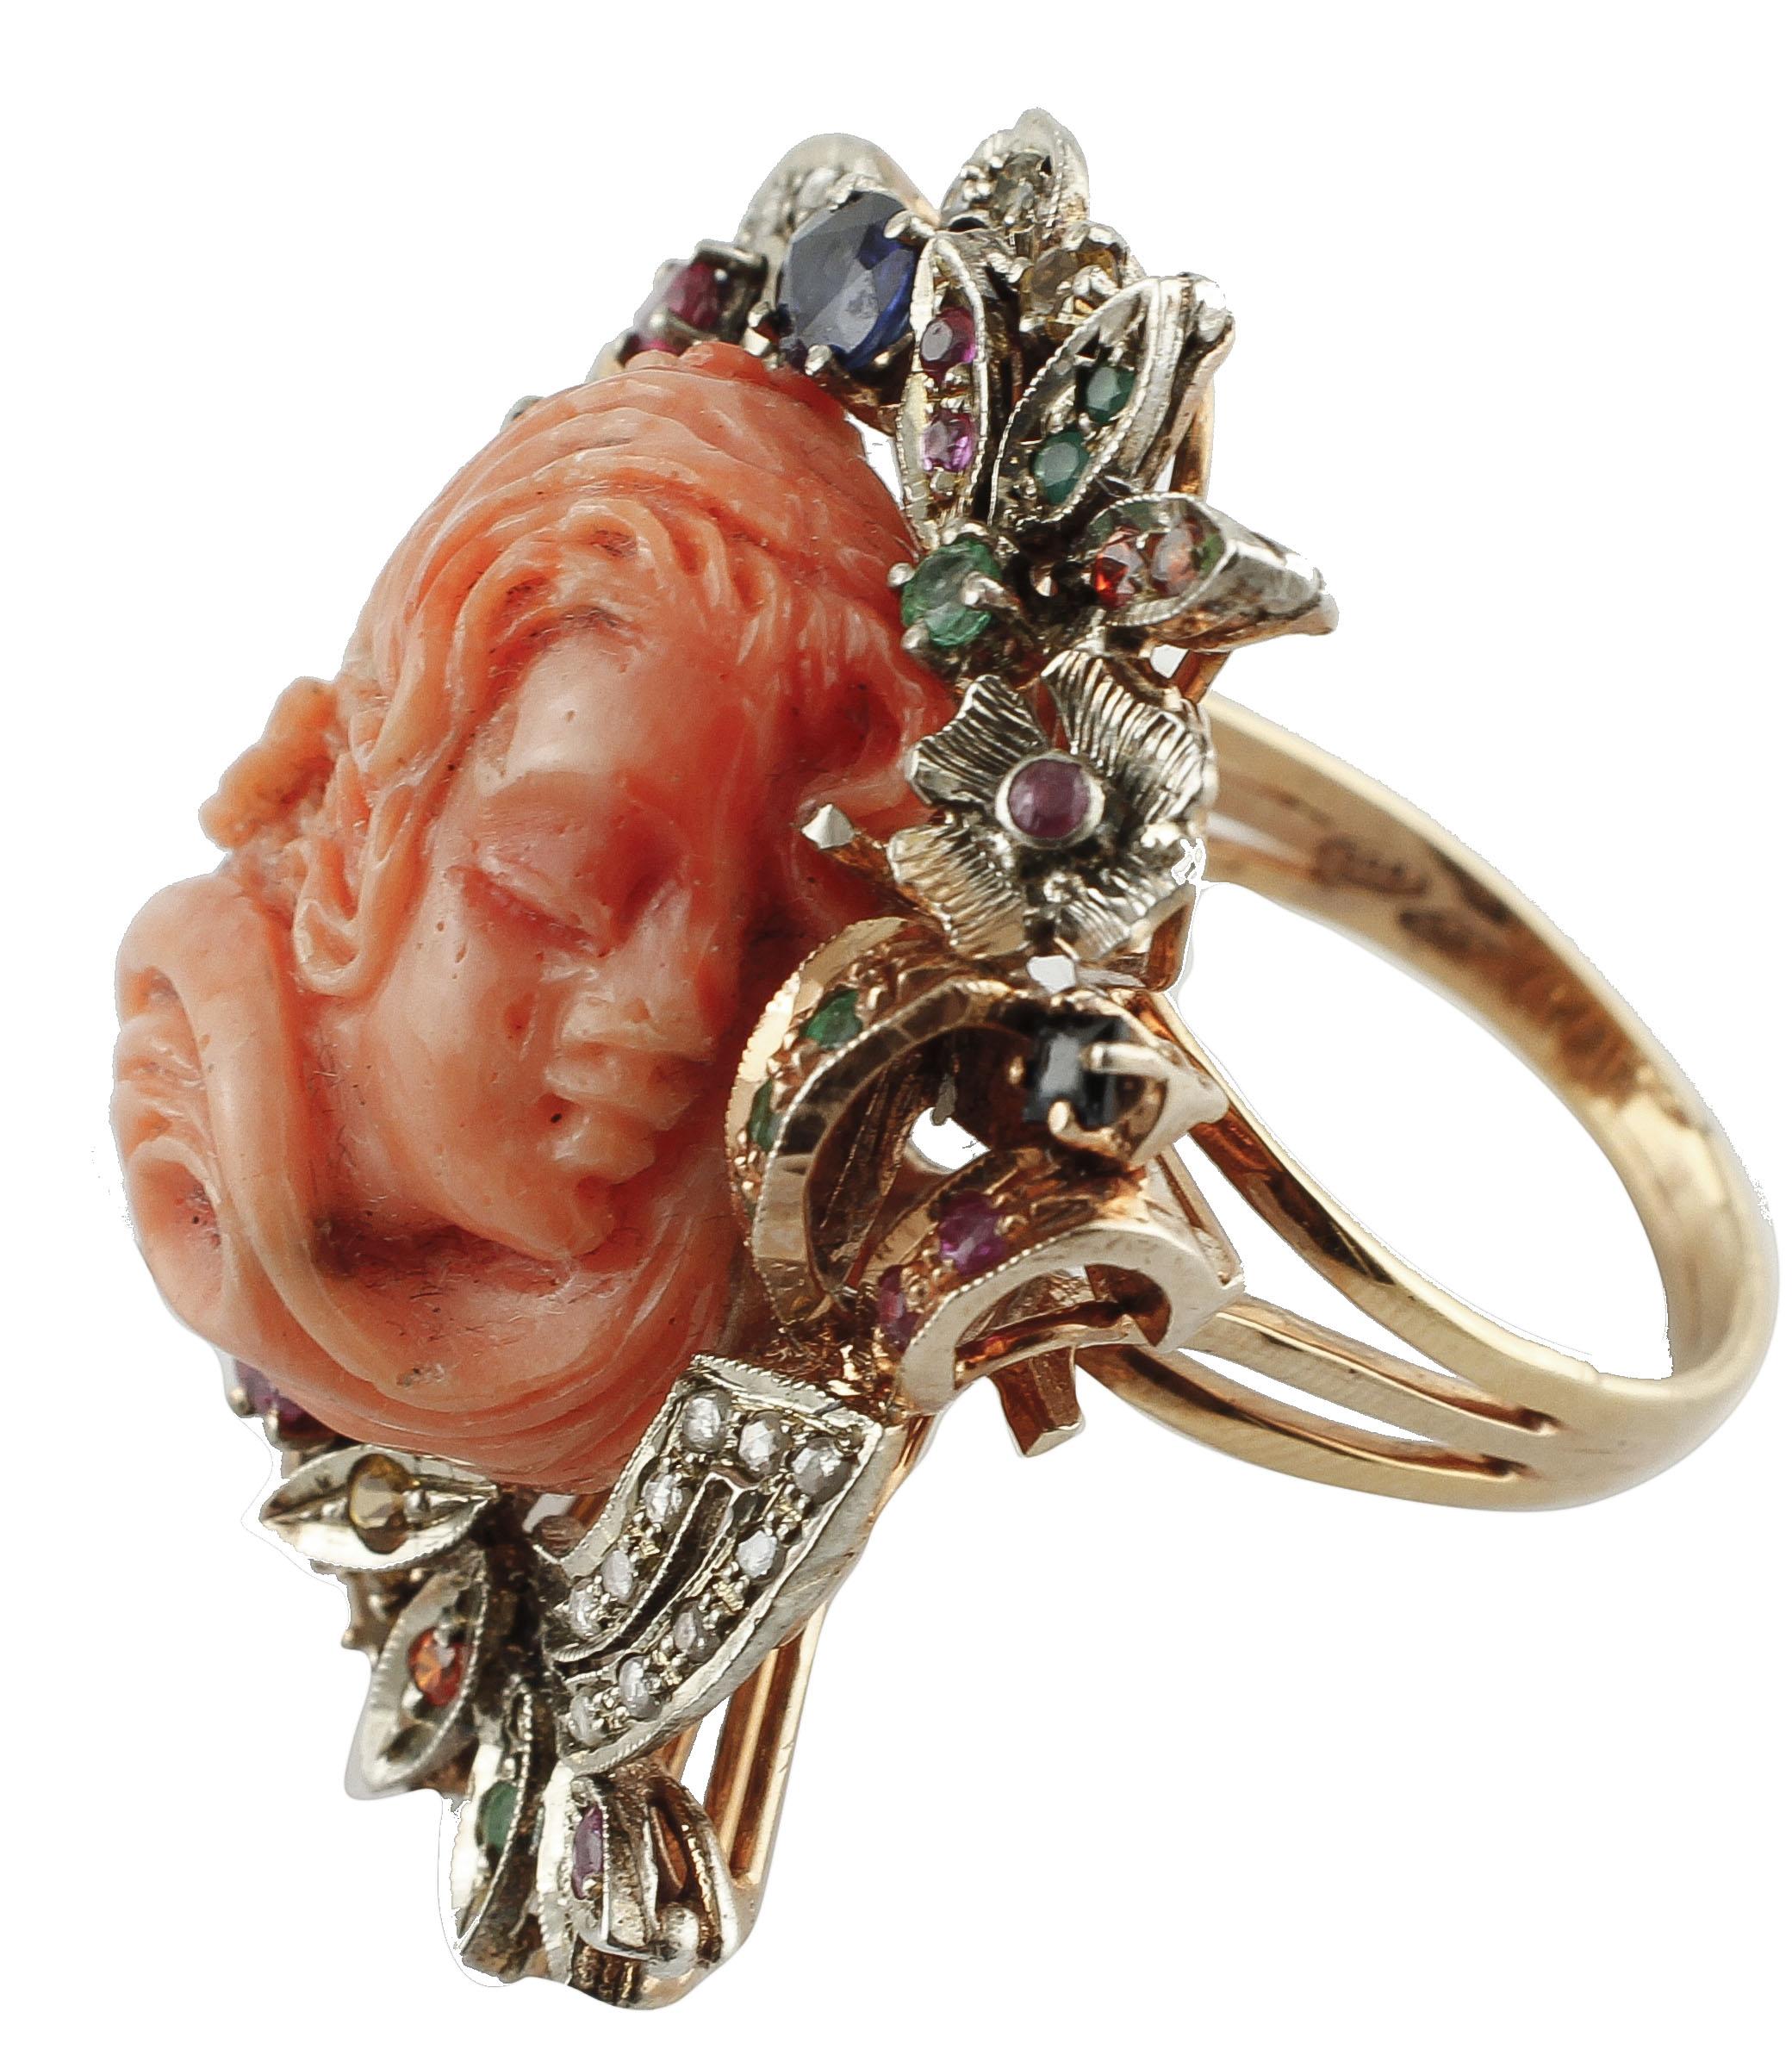 Marvelous ring in 9k rose gold and silver structure, mounted with a central finely carved stone, surrounded by flowery details in rose gold and silver studded with diamonds, rubies, emeralds and multicolored sapphires.
This ring is totally handmade